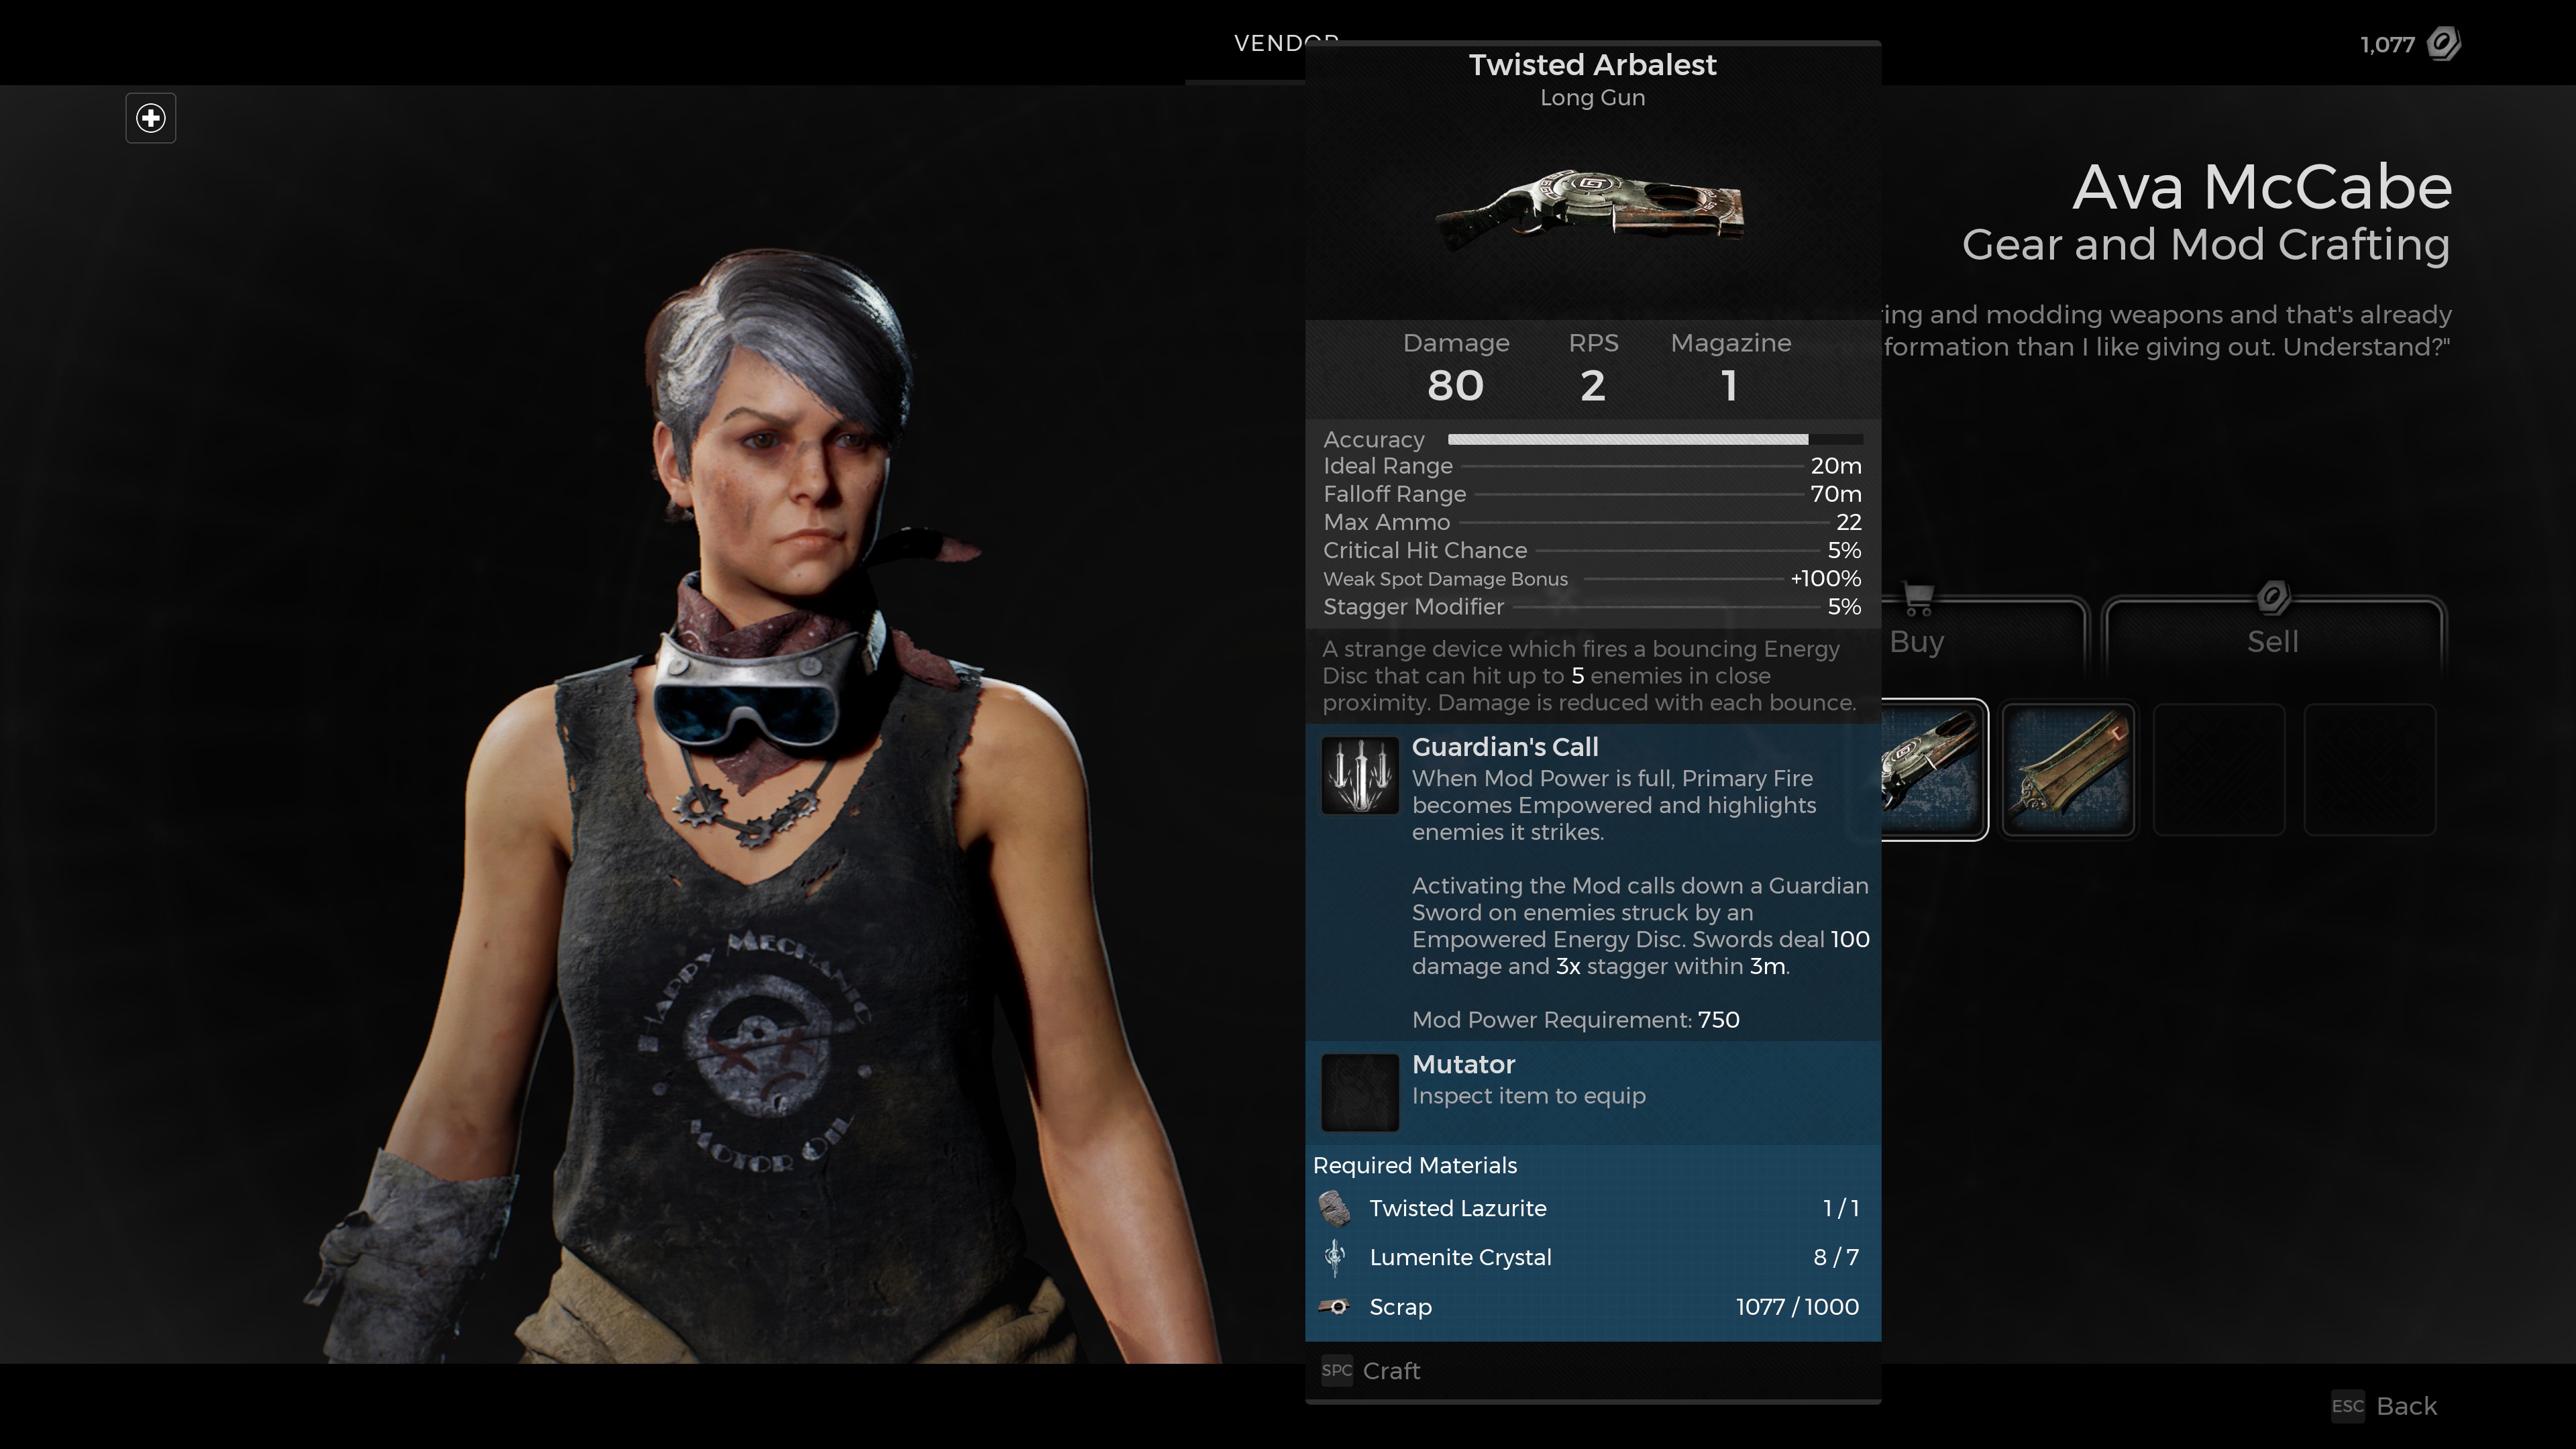 An image of Ava McCabe, gear and mod crafting